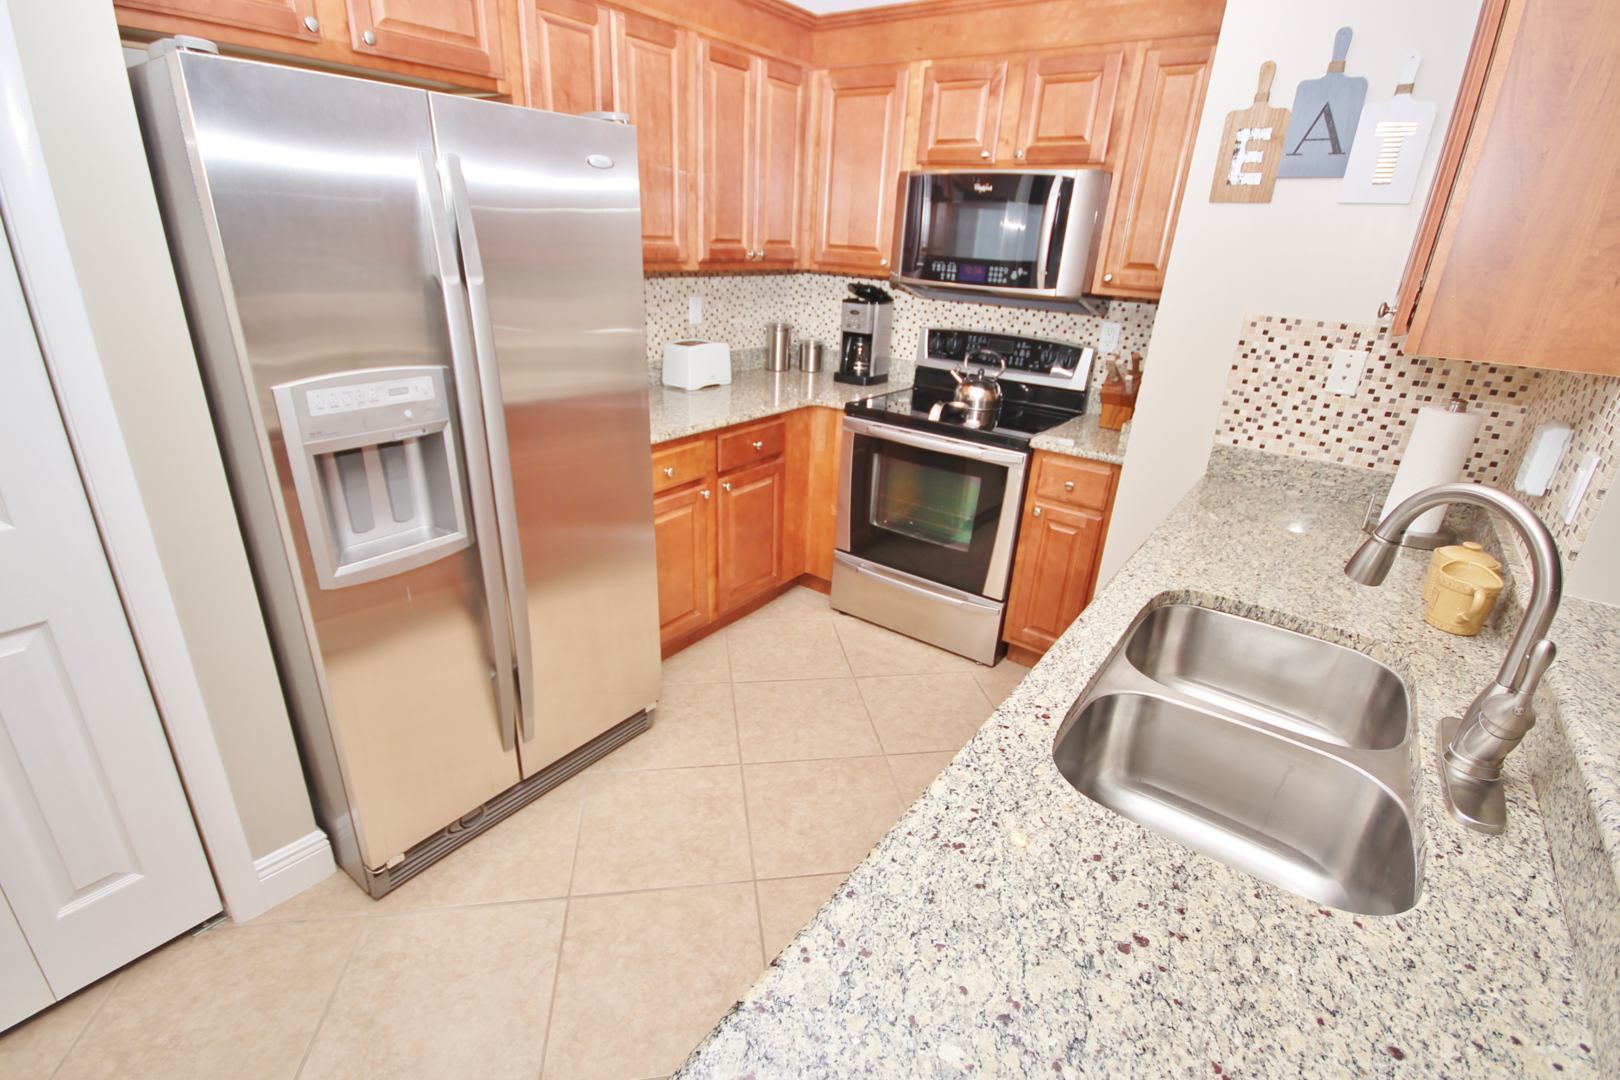 The updated kitchen comes equipped with stainless steel appliances